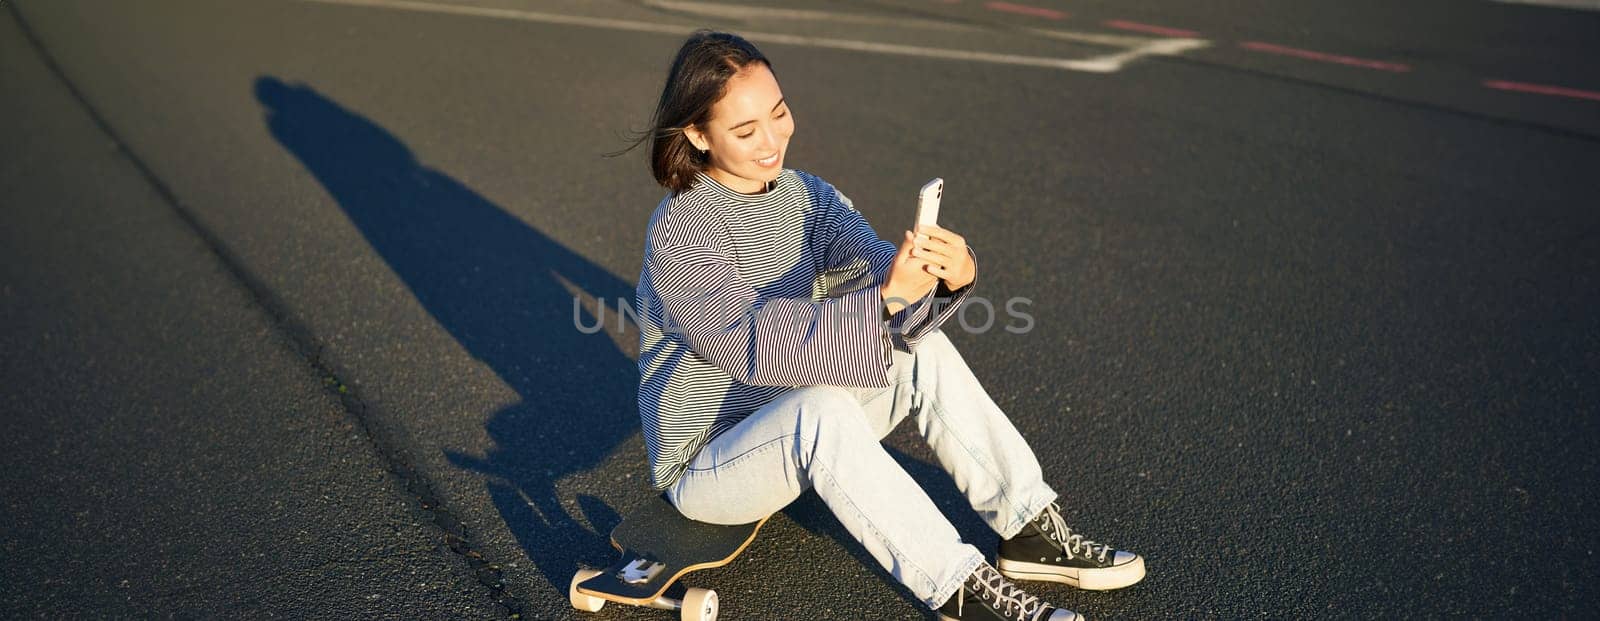 Happy asian girl sits on skateboard, takes selfie with longboard, makes cute faces, sunny day outdoors.